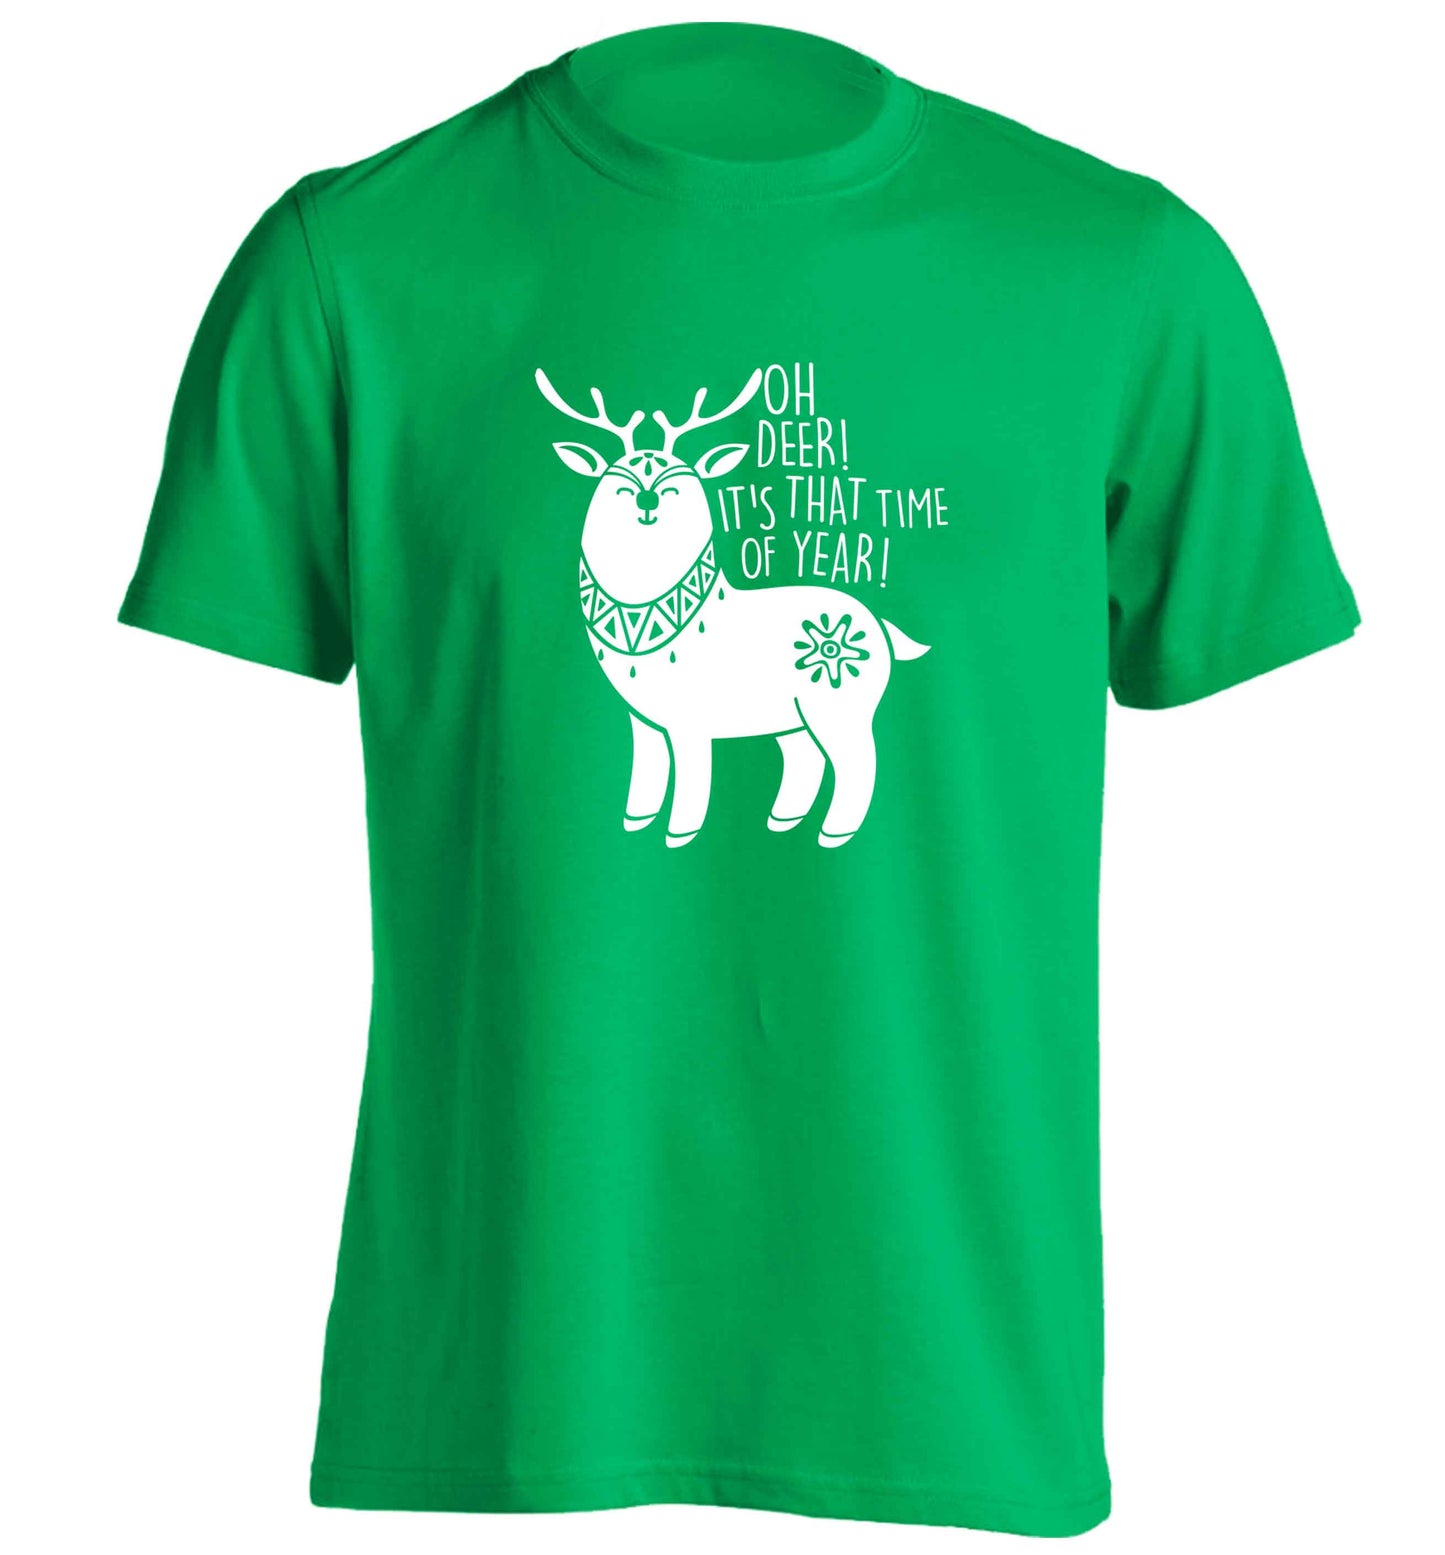 Oh dear it's that time of year adults unisex green Tshirt 2XL